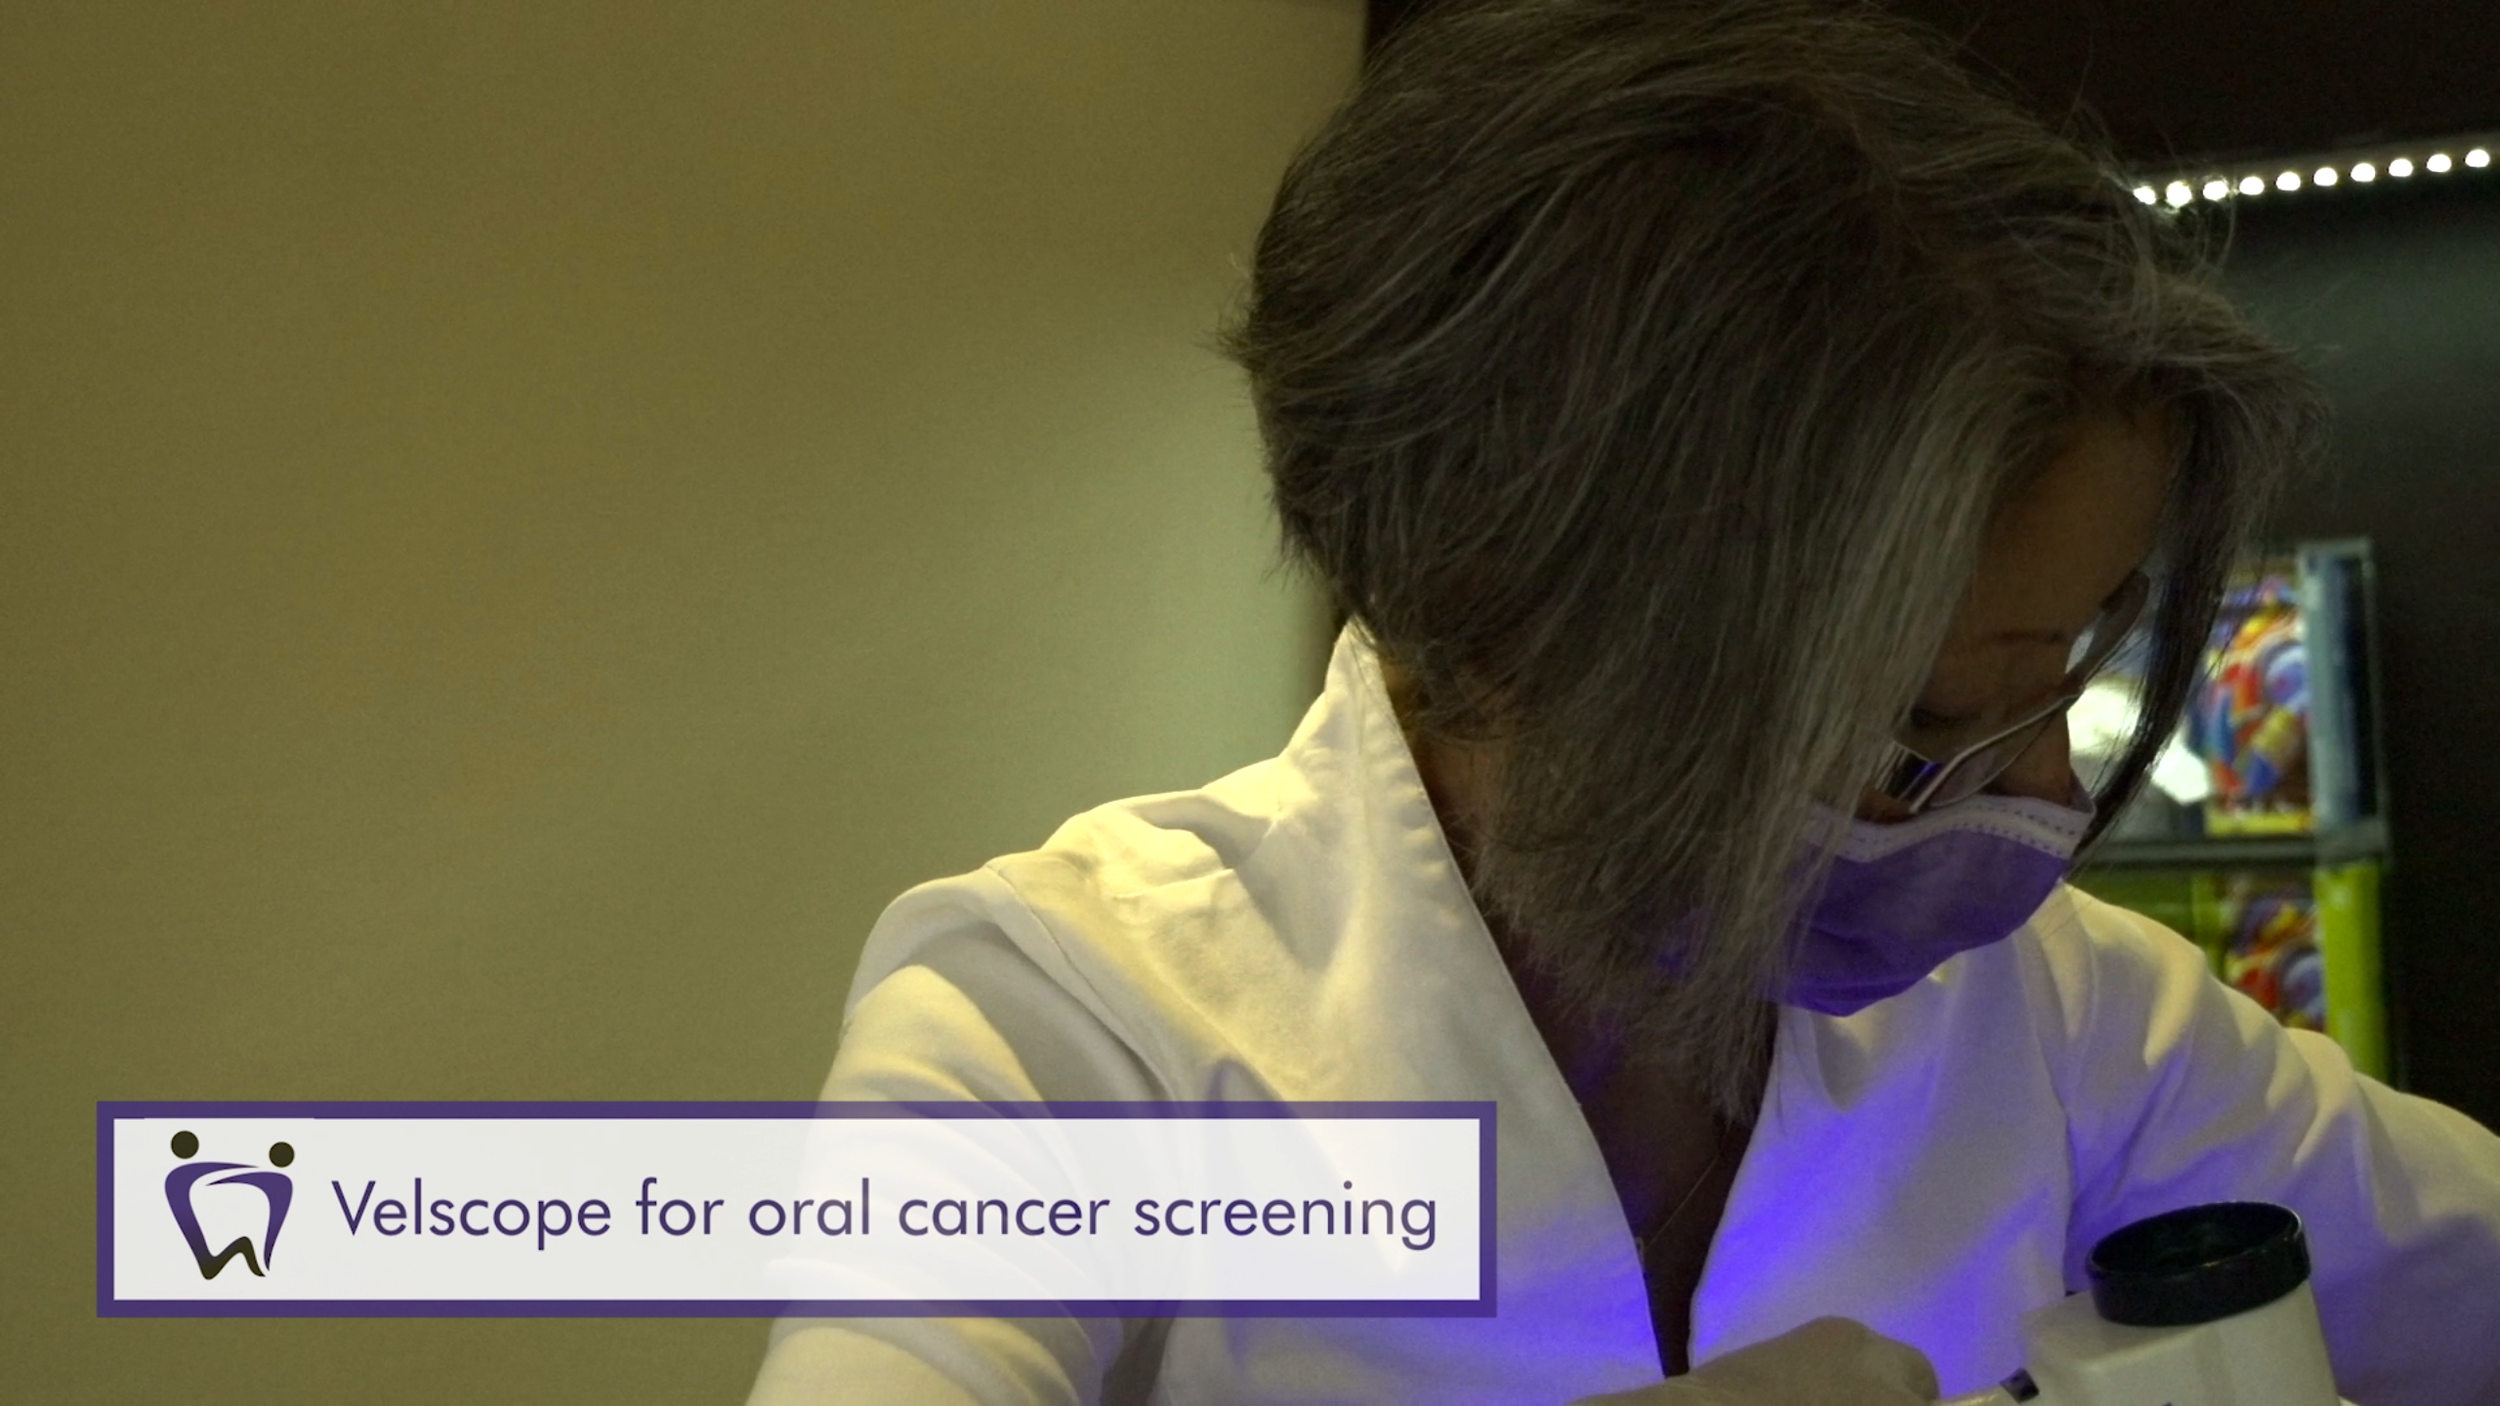 Velscope for oral cancer screening